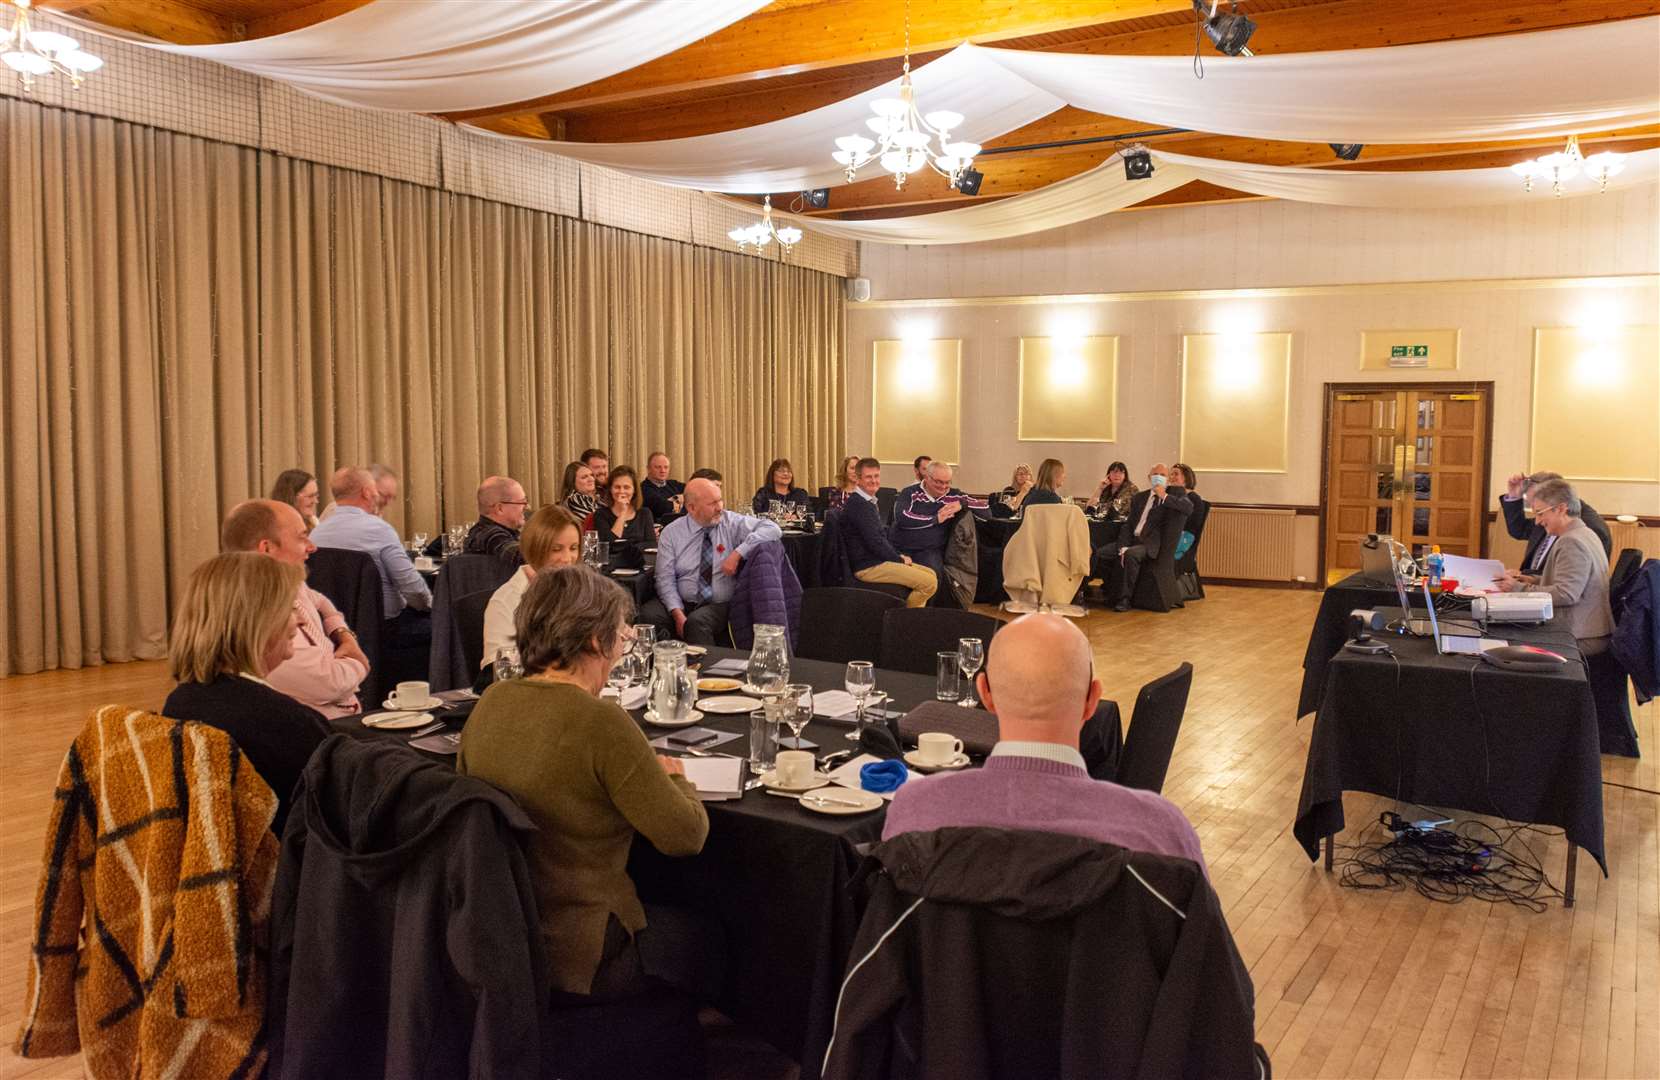 Caithness Chamber of Commerce members were welcomed to the organisation's first in-person AGM since the start of the pandemic.